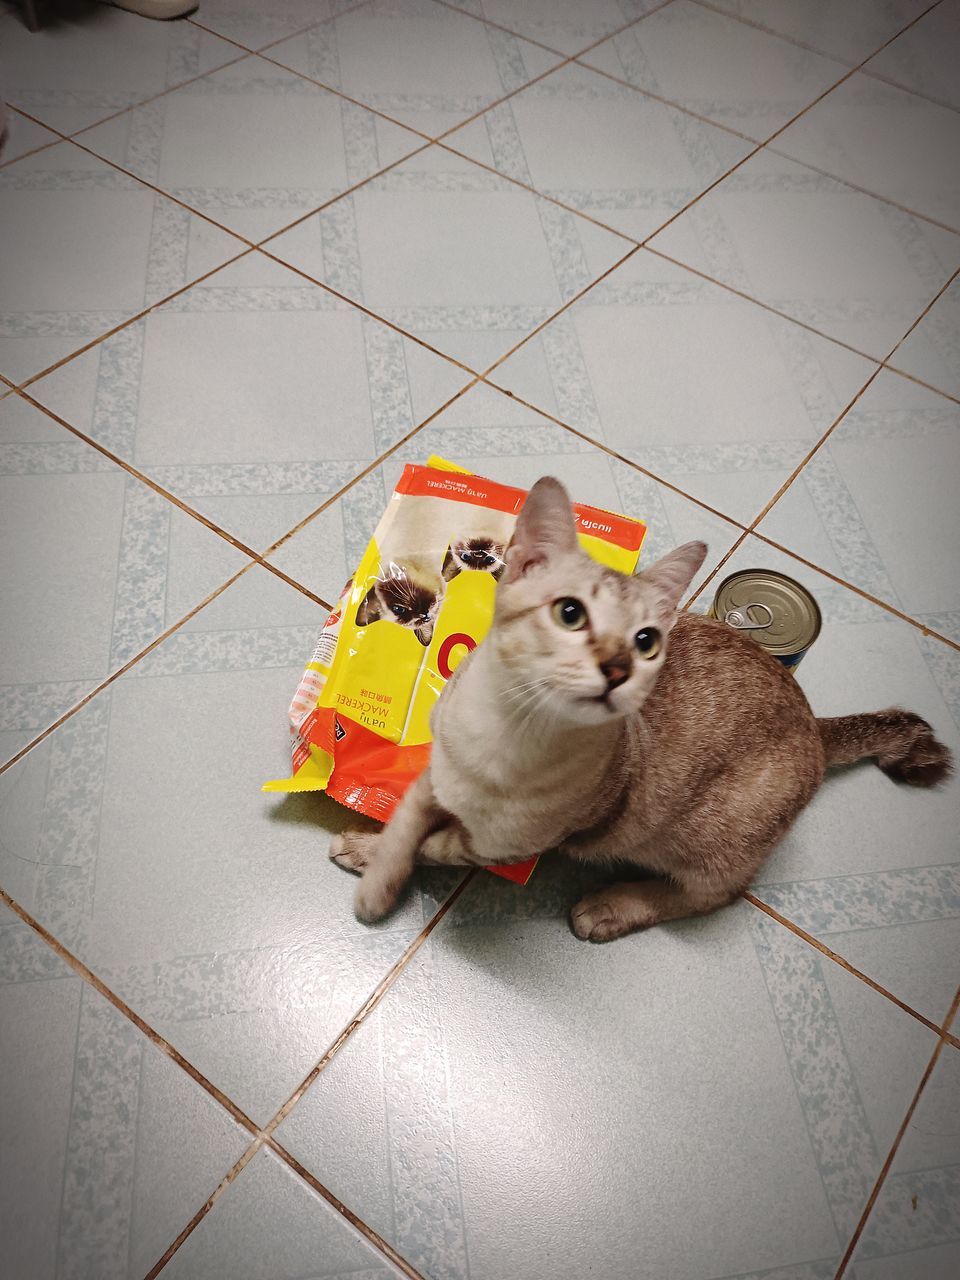 flooring, pet, tile, toy, tiled floor, yellow, animal, mammal, animal themes, high angle view, indoors, domestic animals, cat, no people, one animal, full length, representation, animal representation, cute